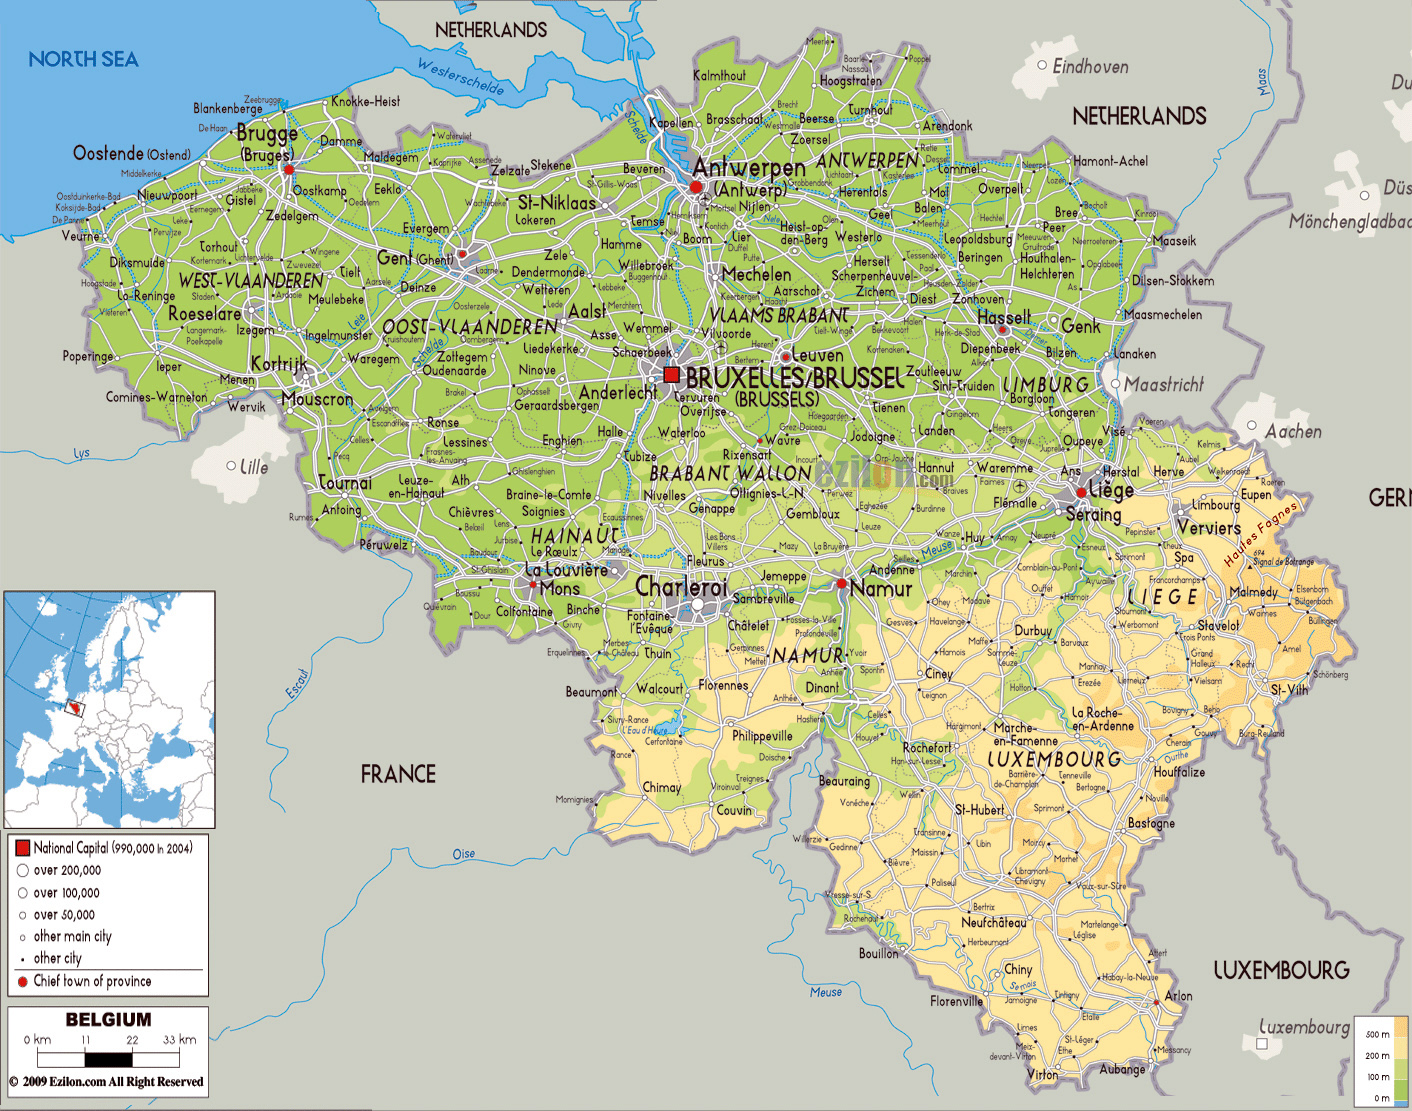 large-physical-map-of-belgium-with-roads-cities-and-airports-belgium-europe-mapsland